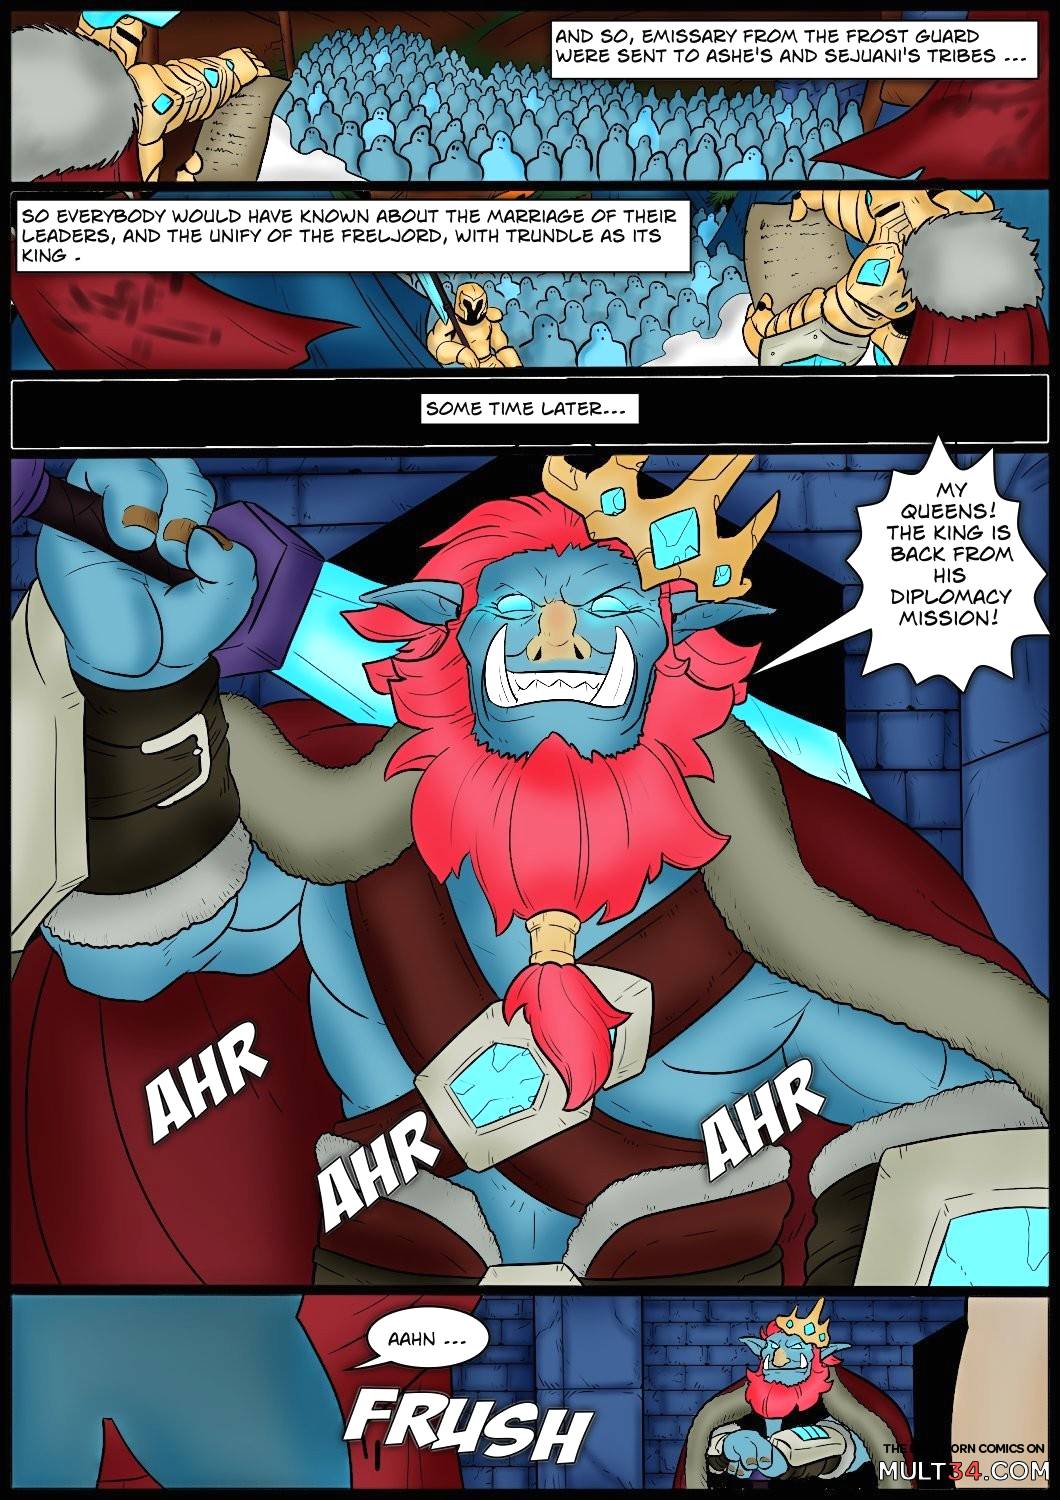 Tales of the Troll King ch. 1 - 3 ] [Colorized] page 55